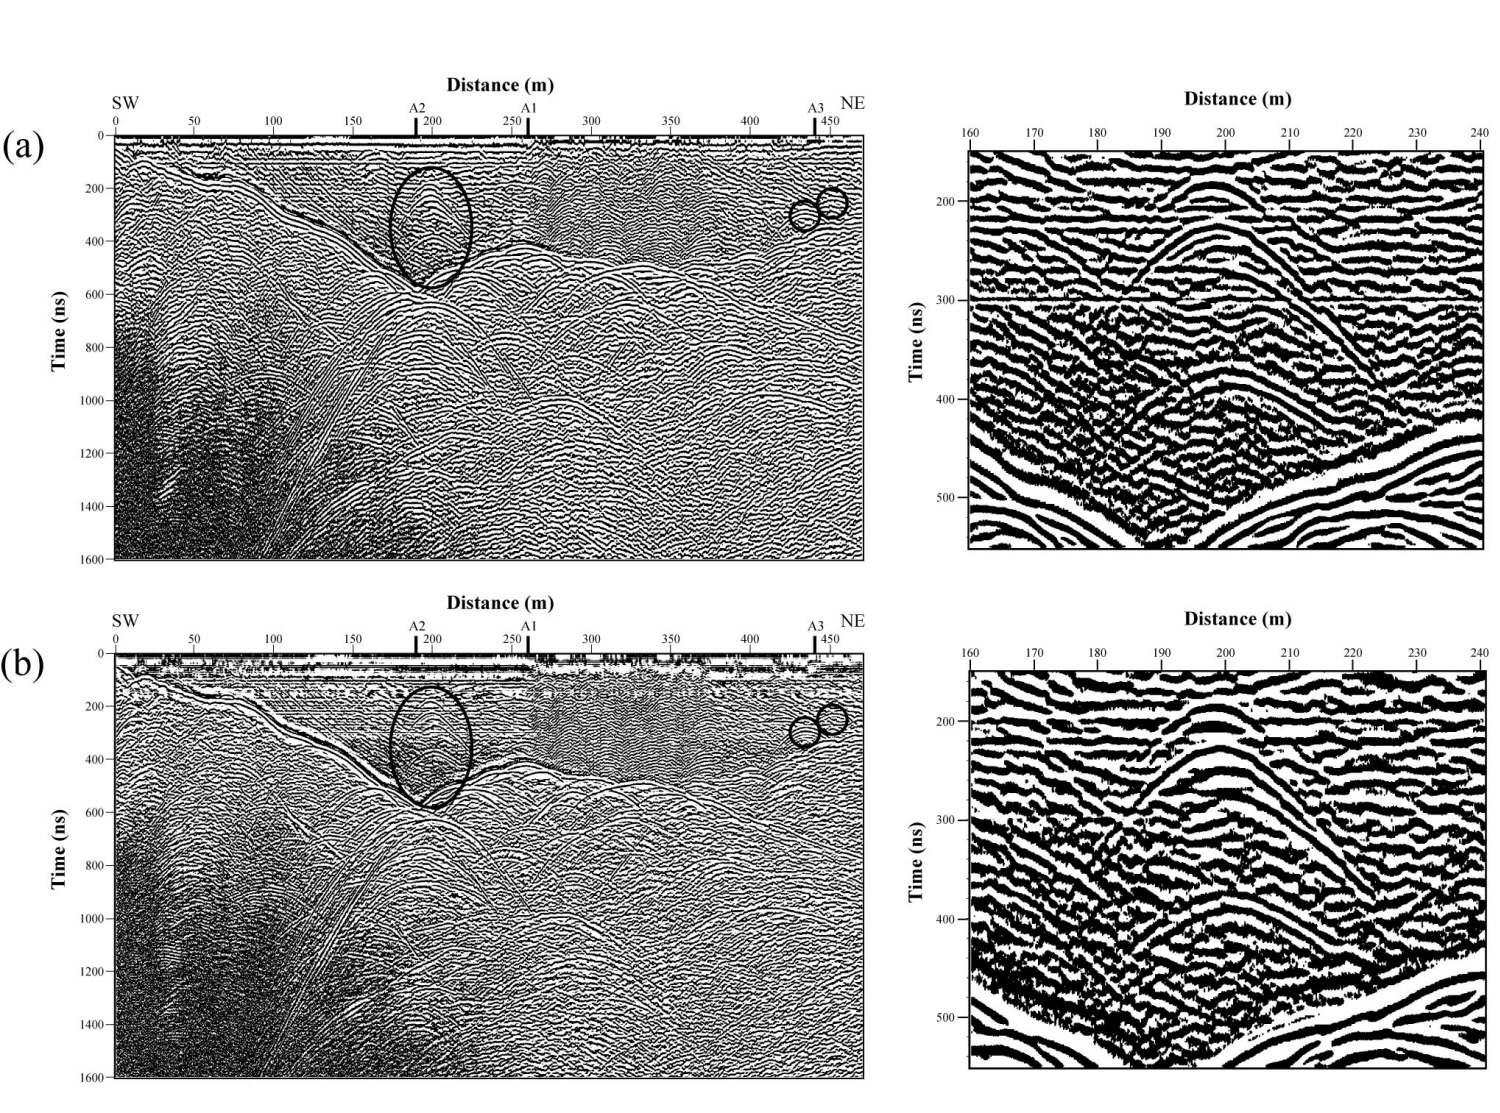 Normal moveout-corrected radar sections of Profile S1 (a) before and (b) after signature deconvolution. On the right, expanded portions of these sections for the profile distance range of 160–240m show that the deconvolution successfully attenuated reverberations and compressed the mixed-phase source signatures to increase temporal resolution. Automatic gain control with a 10-ns window was applied to the radar sections for display purpose only. Diffractions possibly generated by edges of cavities (open ellipse and circles) are collapsed in the migrated section (Fig. 2-7).